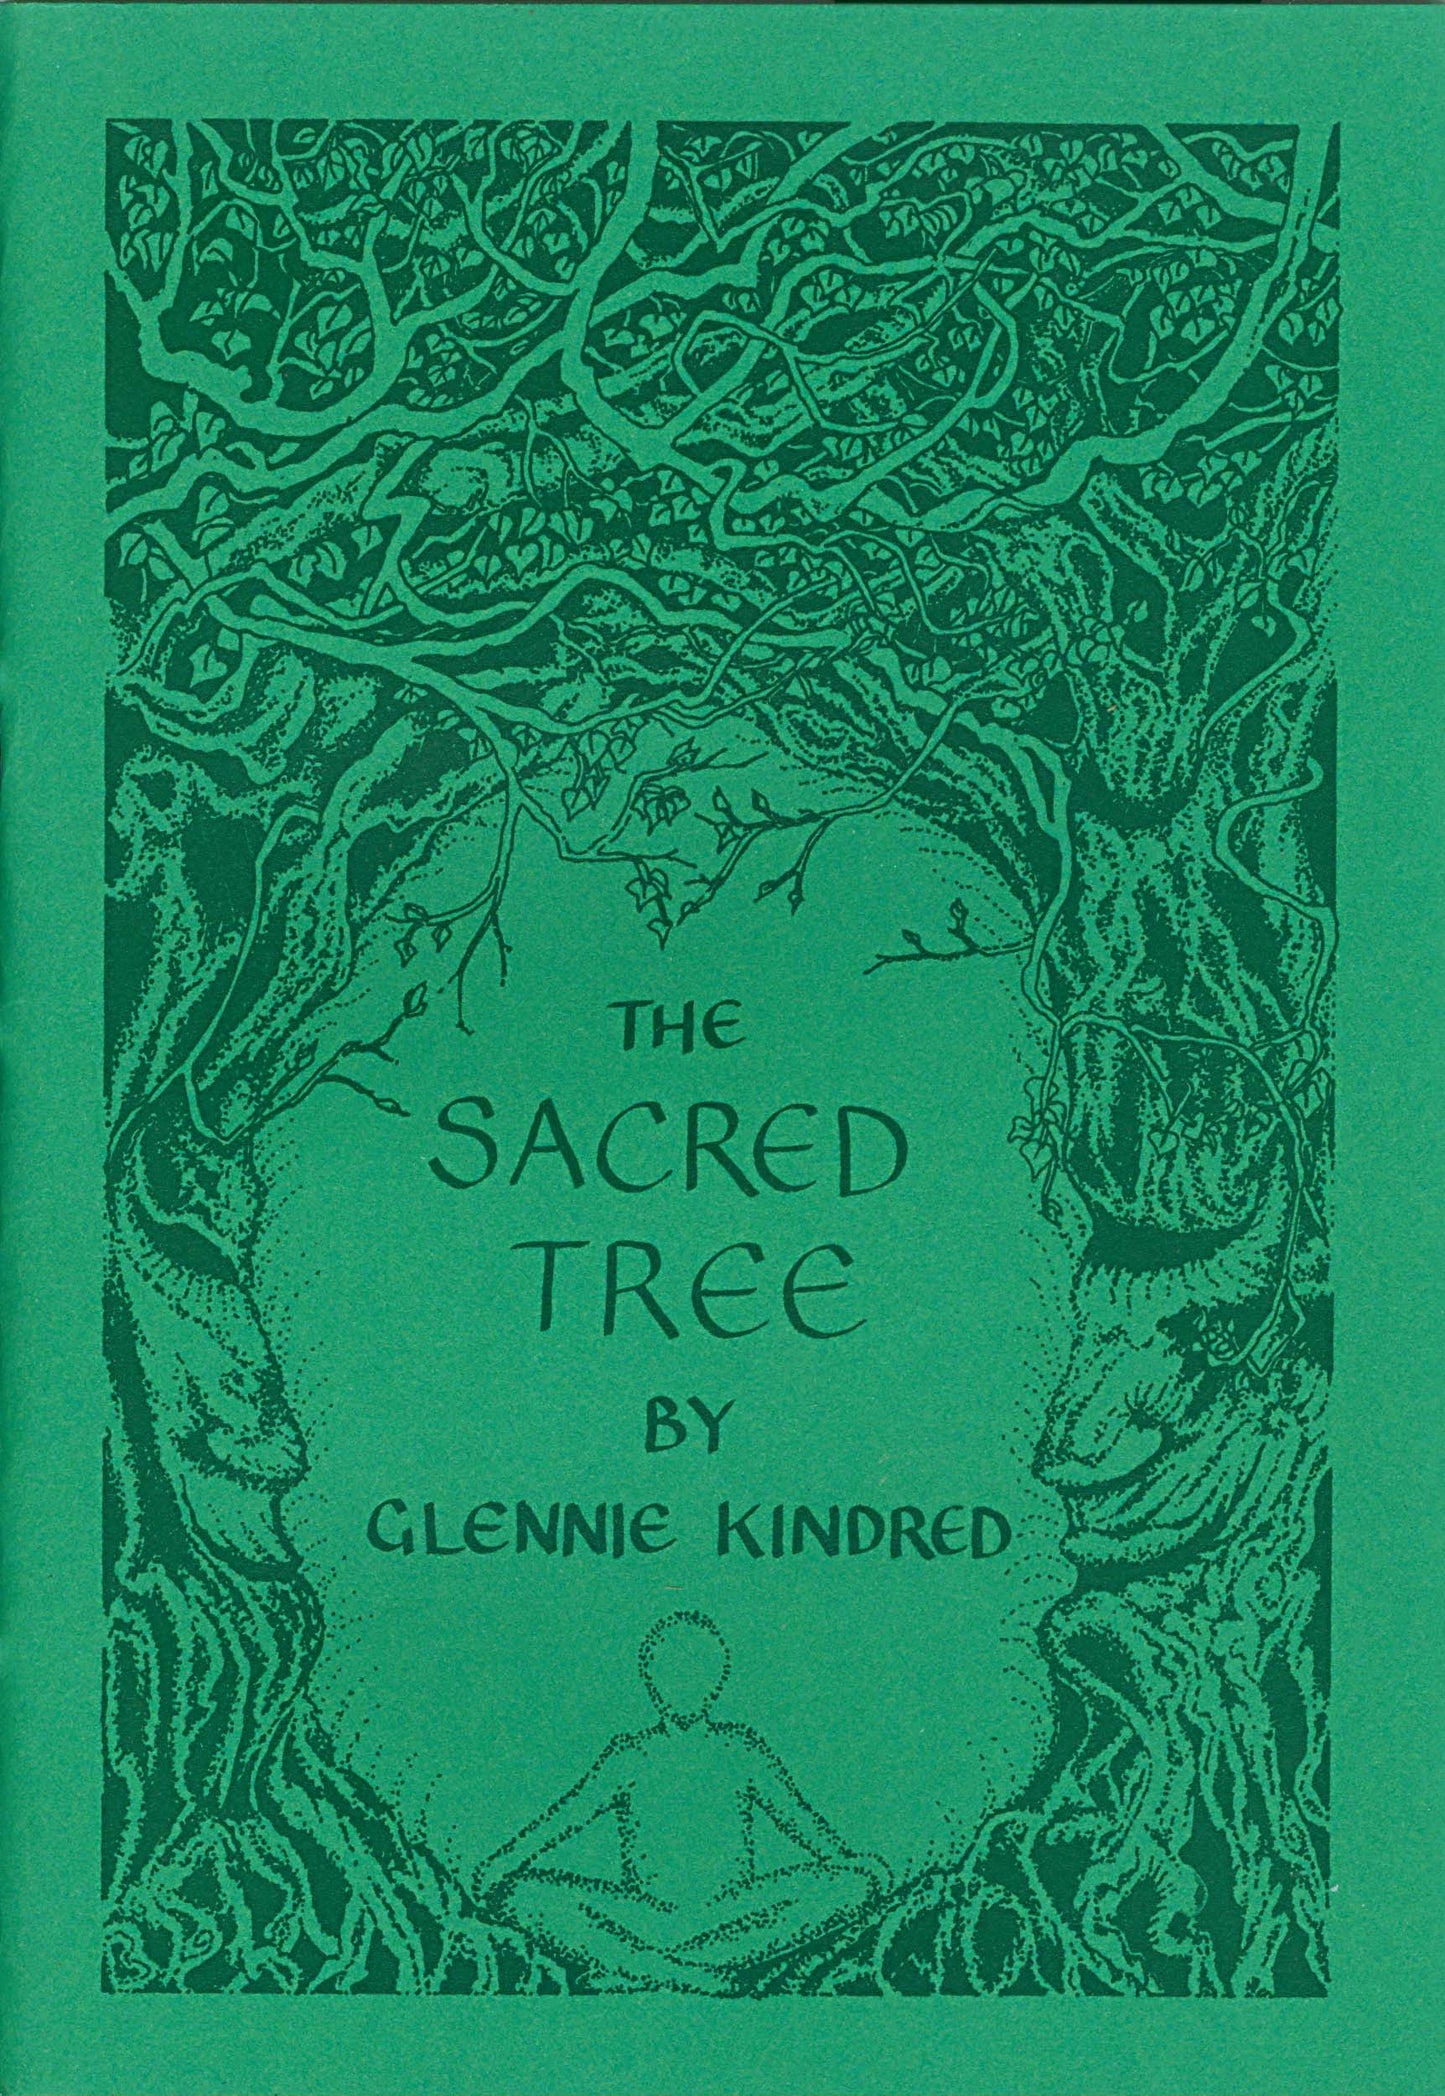 The Sacred Tree by Glennie Kindred